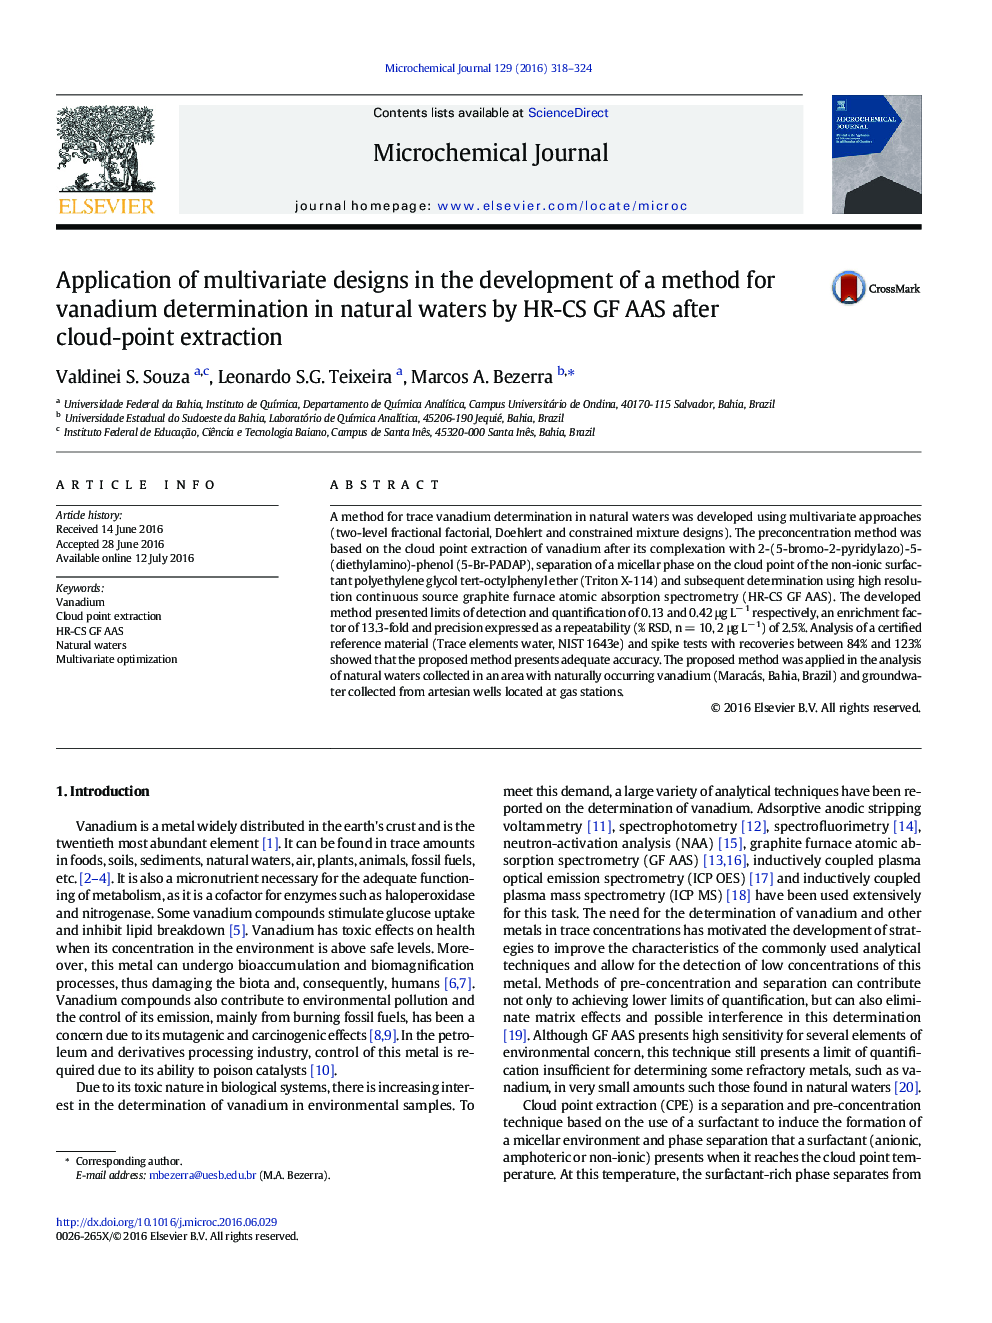 Application of multivariate designs in the development of a method for vanadium determination in natural waters by HR-CS GF AAS after cloud-point extraction